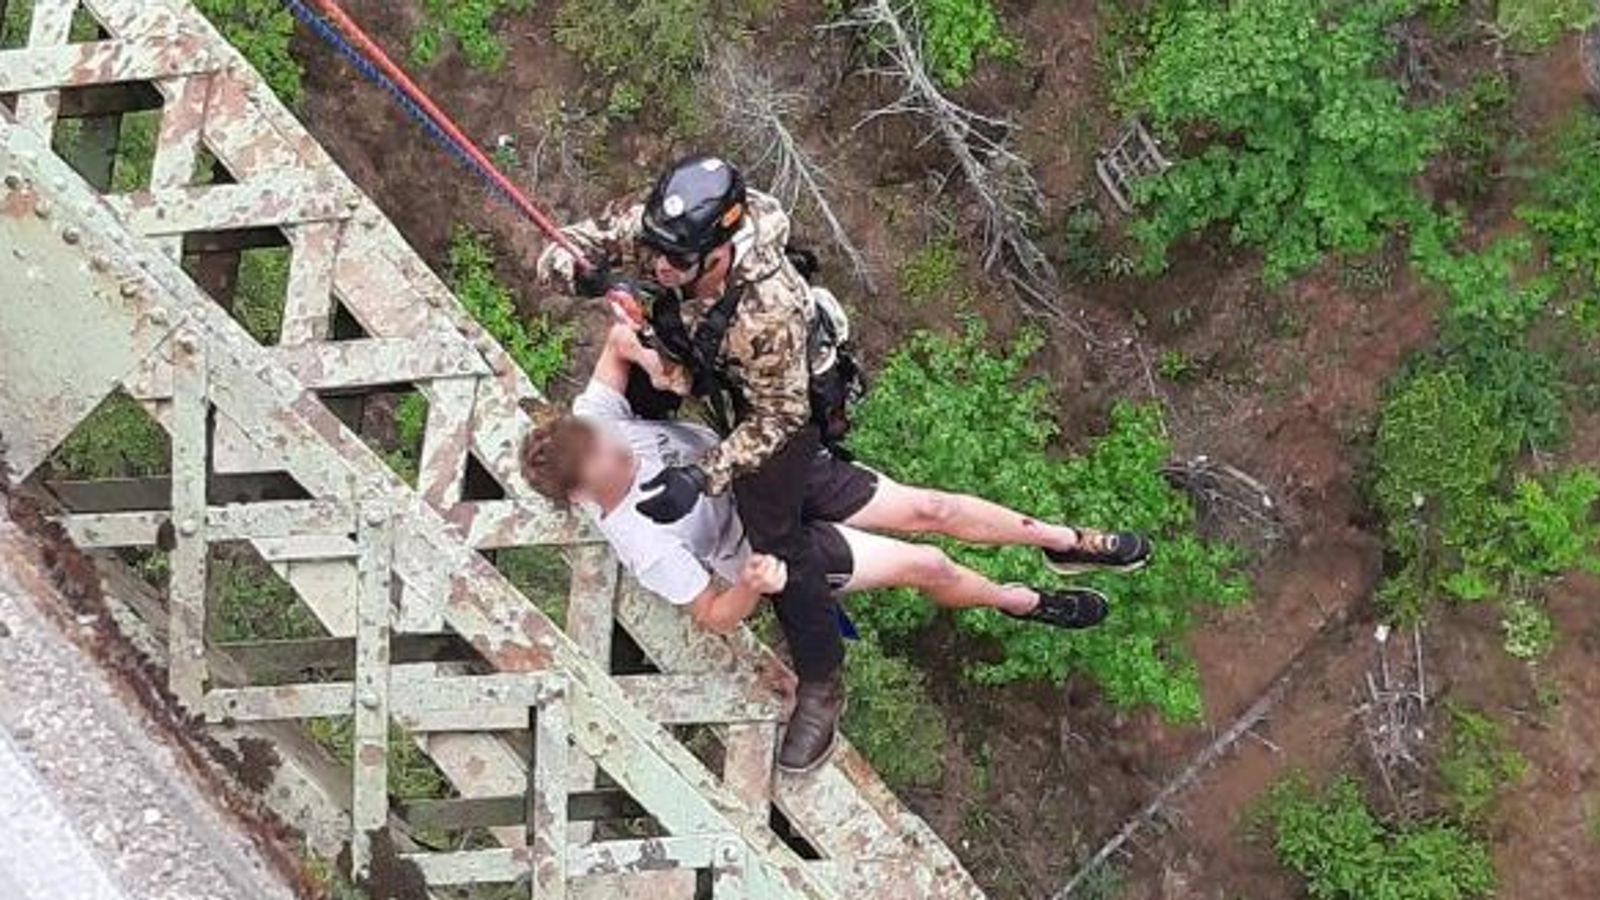 'Incredibly lucky' teenager suffers minor injuries after 400ft canyon fall in Washington State